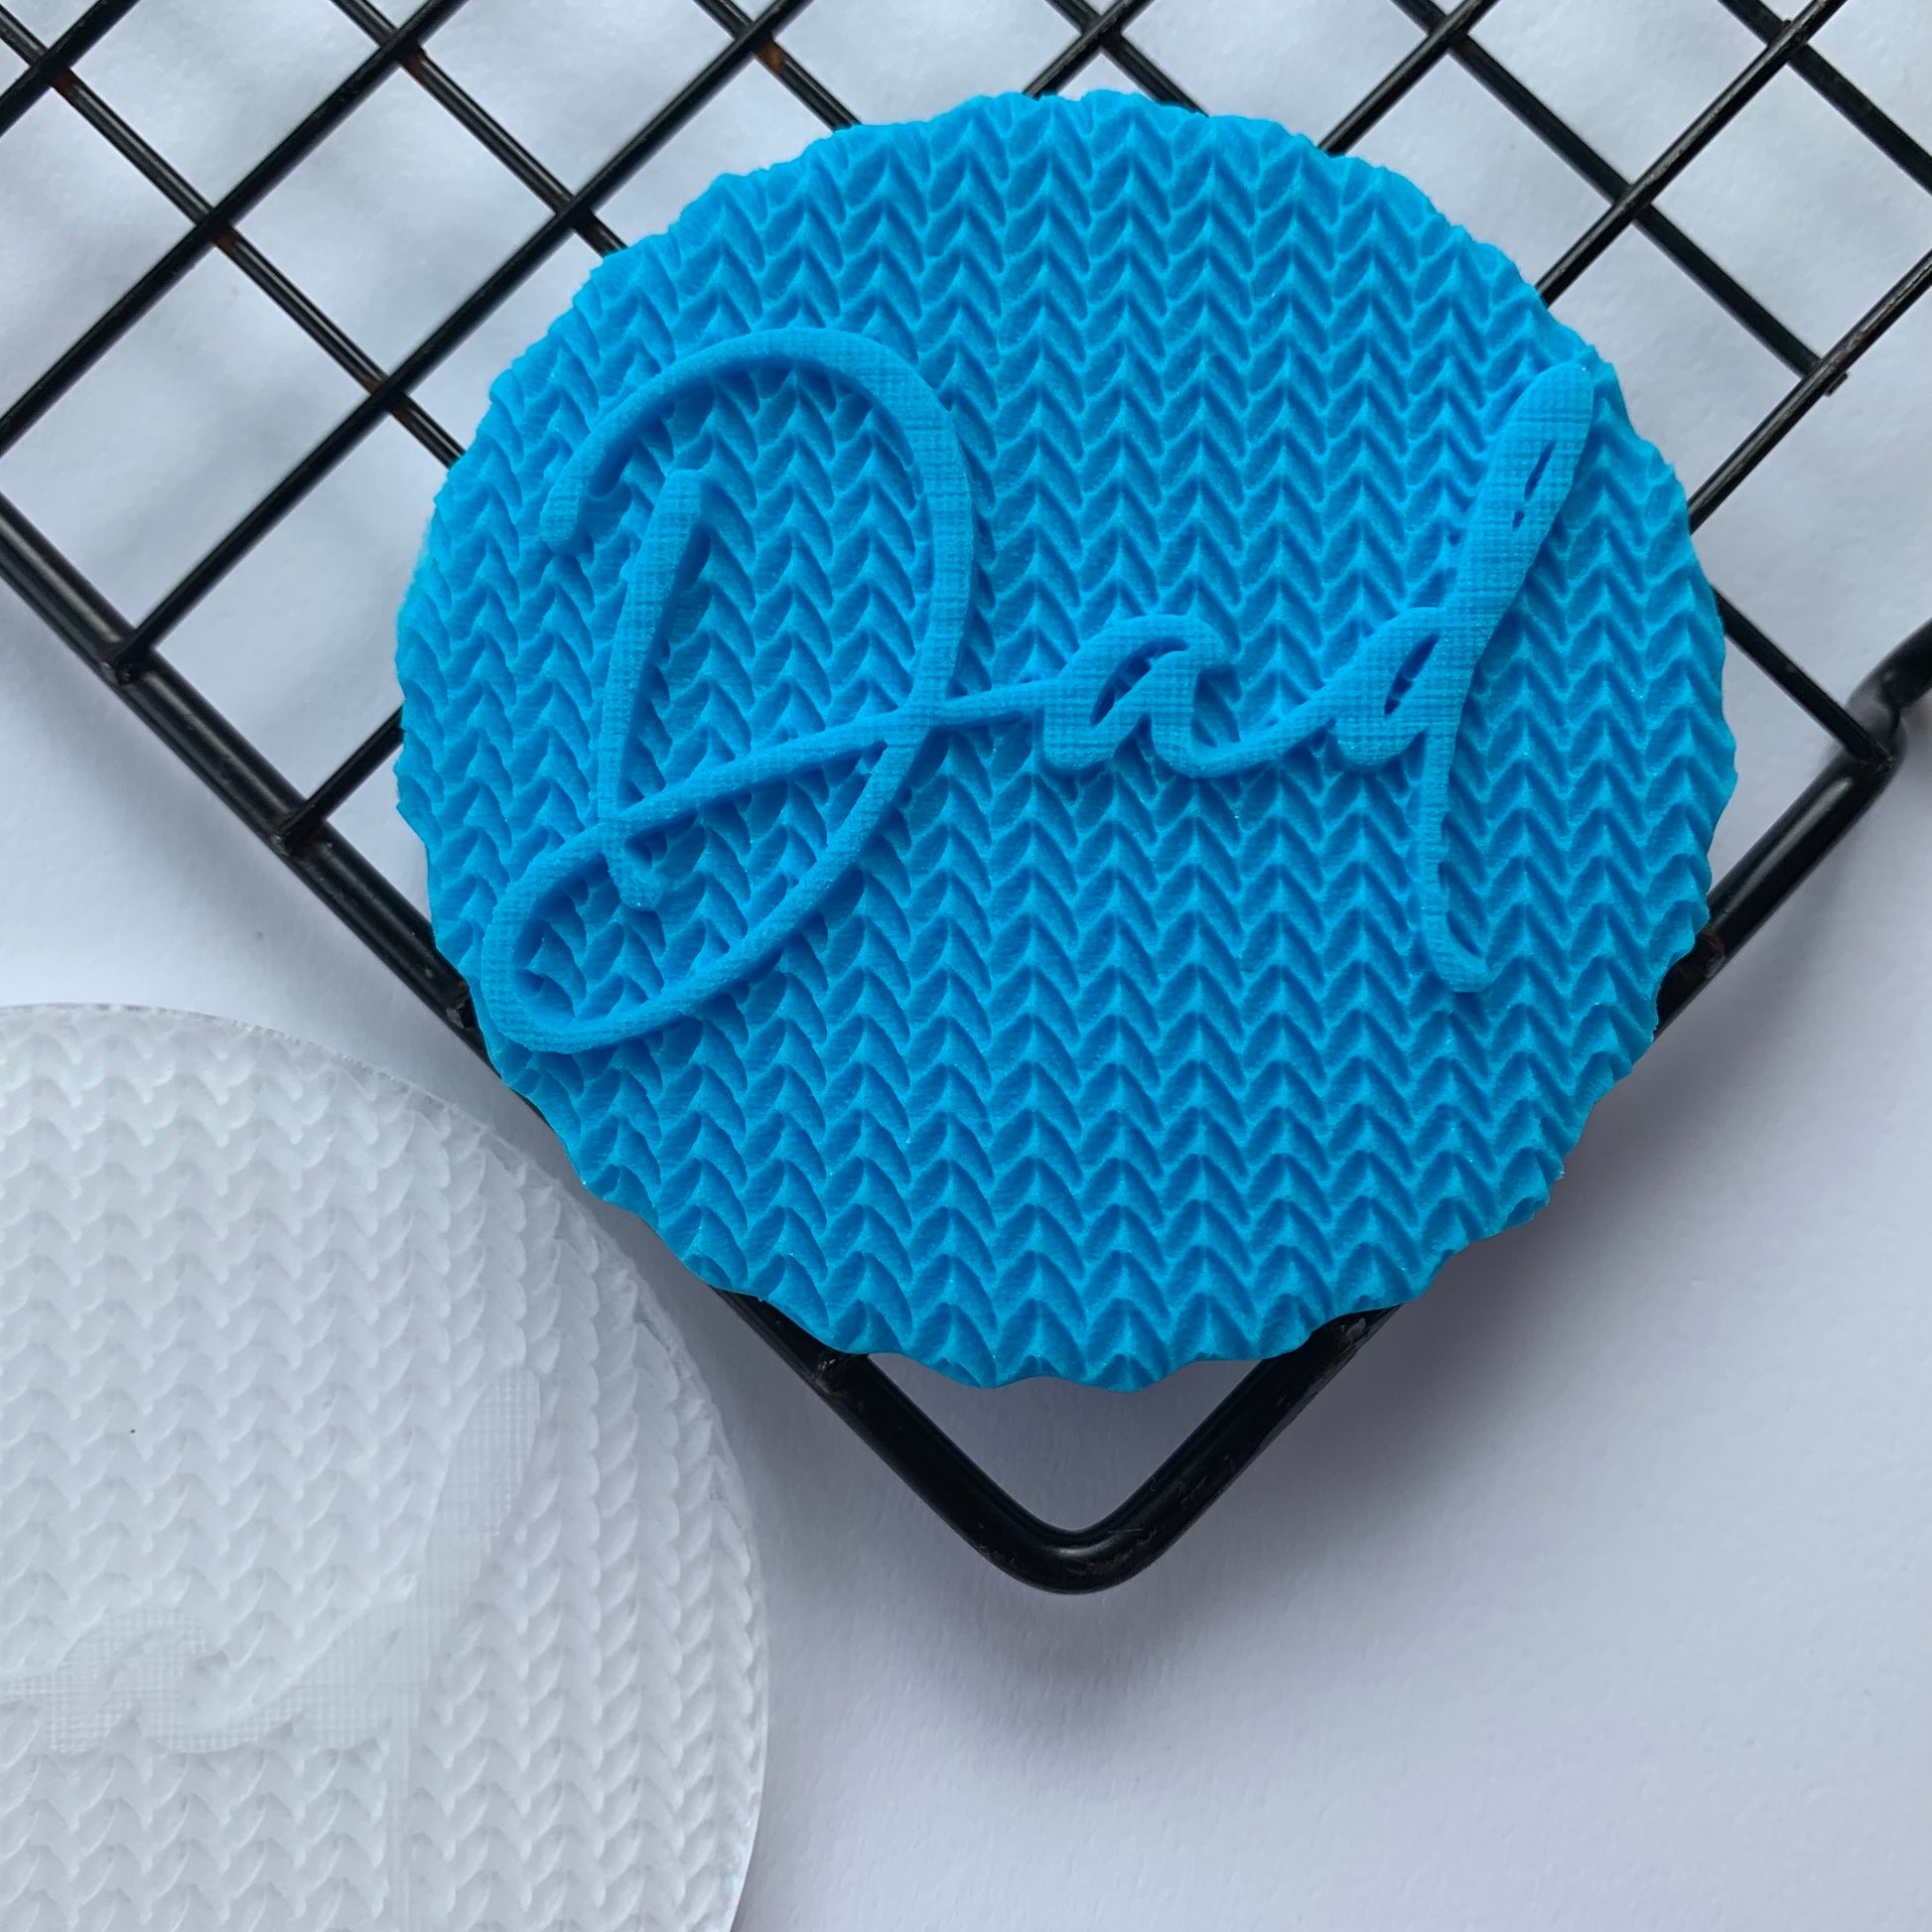 3D debossing Dad Knitting background - acrylic stamp MEG cookie cutters